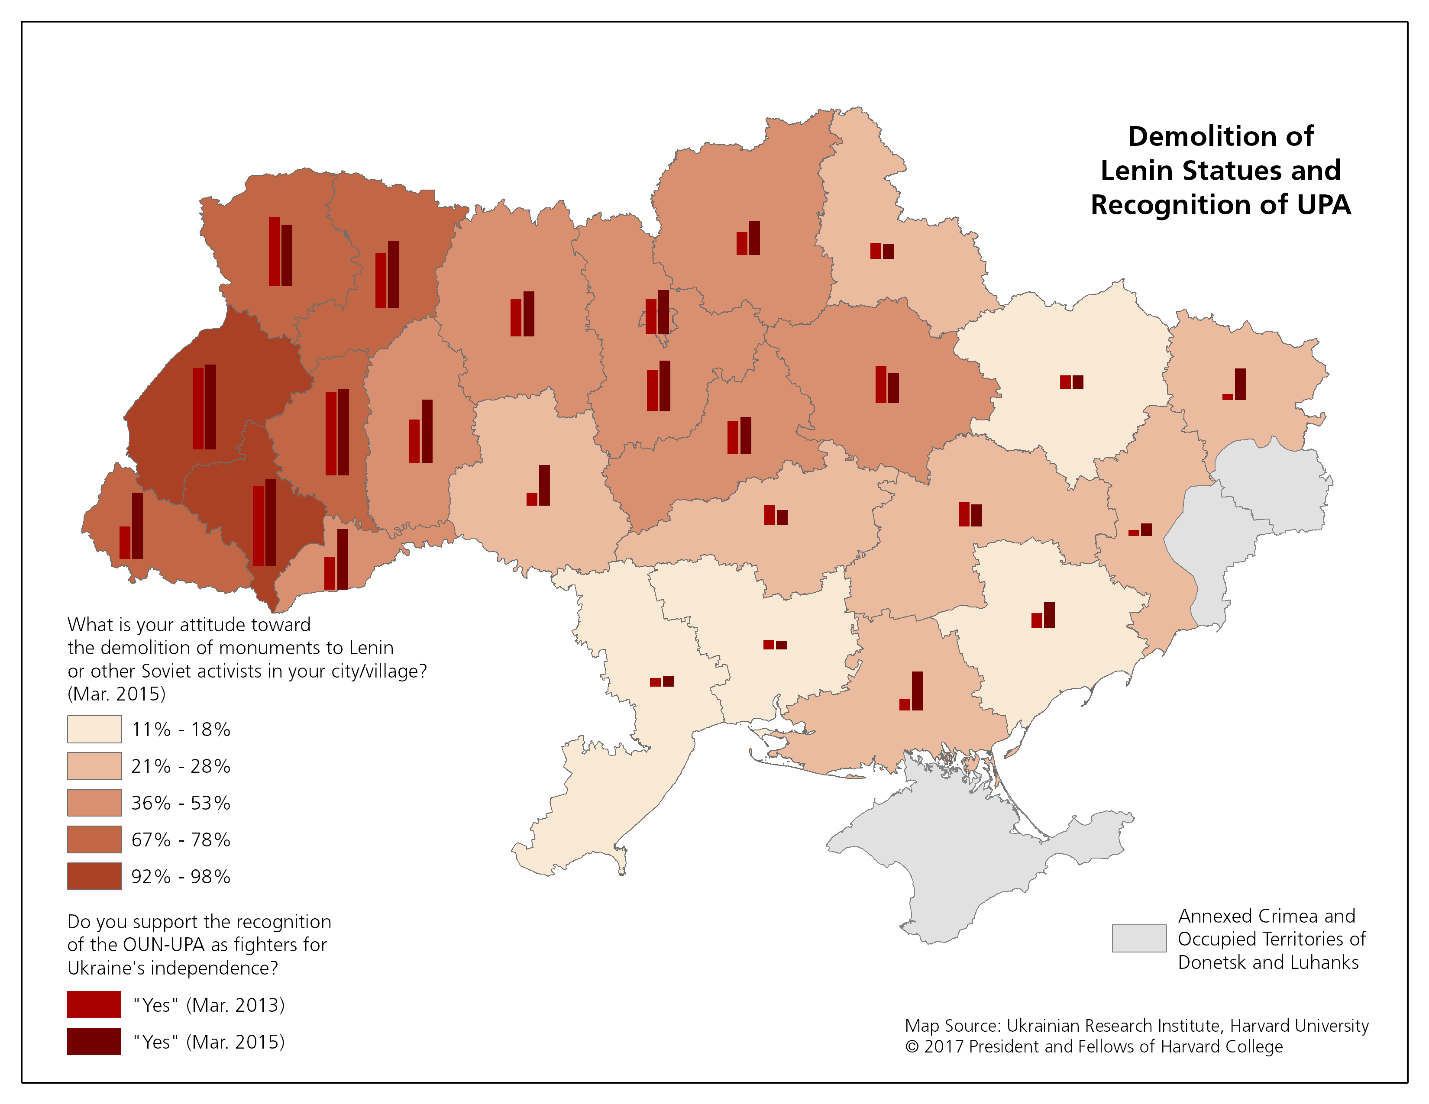 Map: Demolition of Lenin Statues and Recognition of UPA